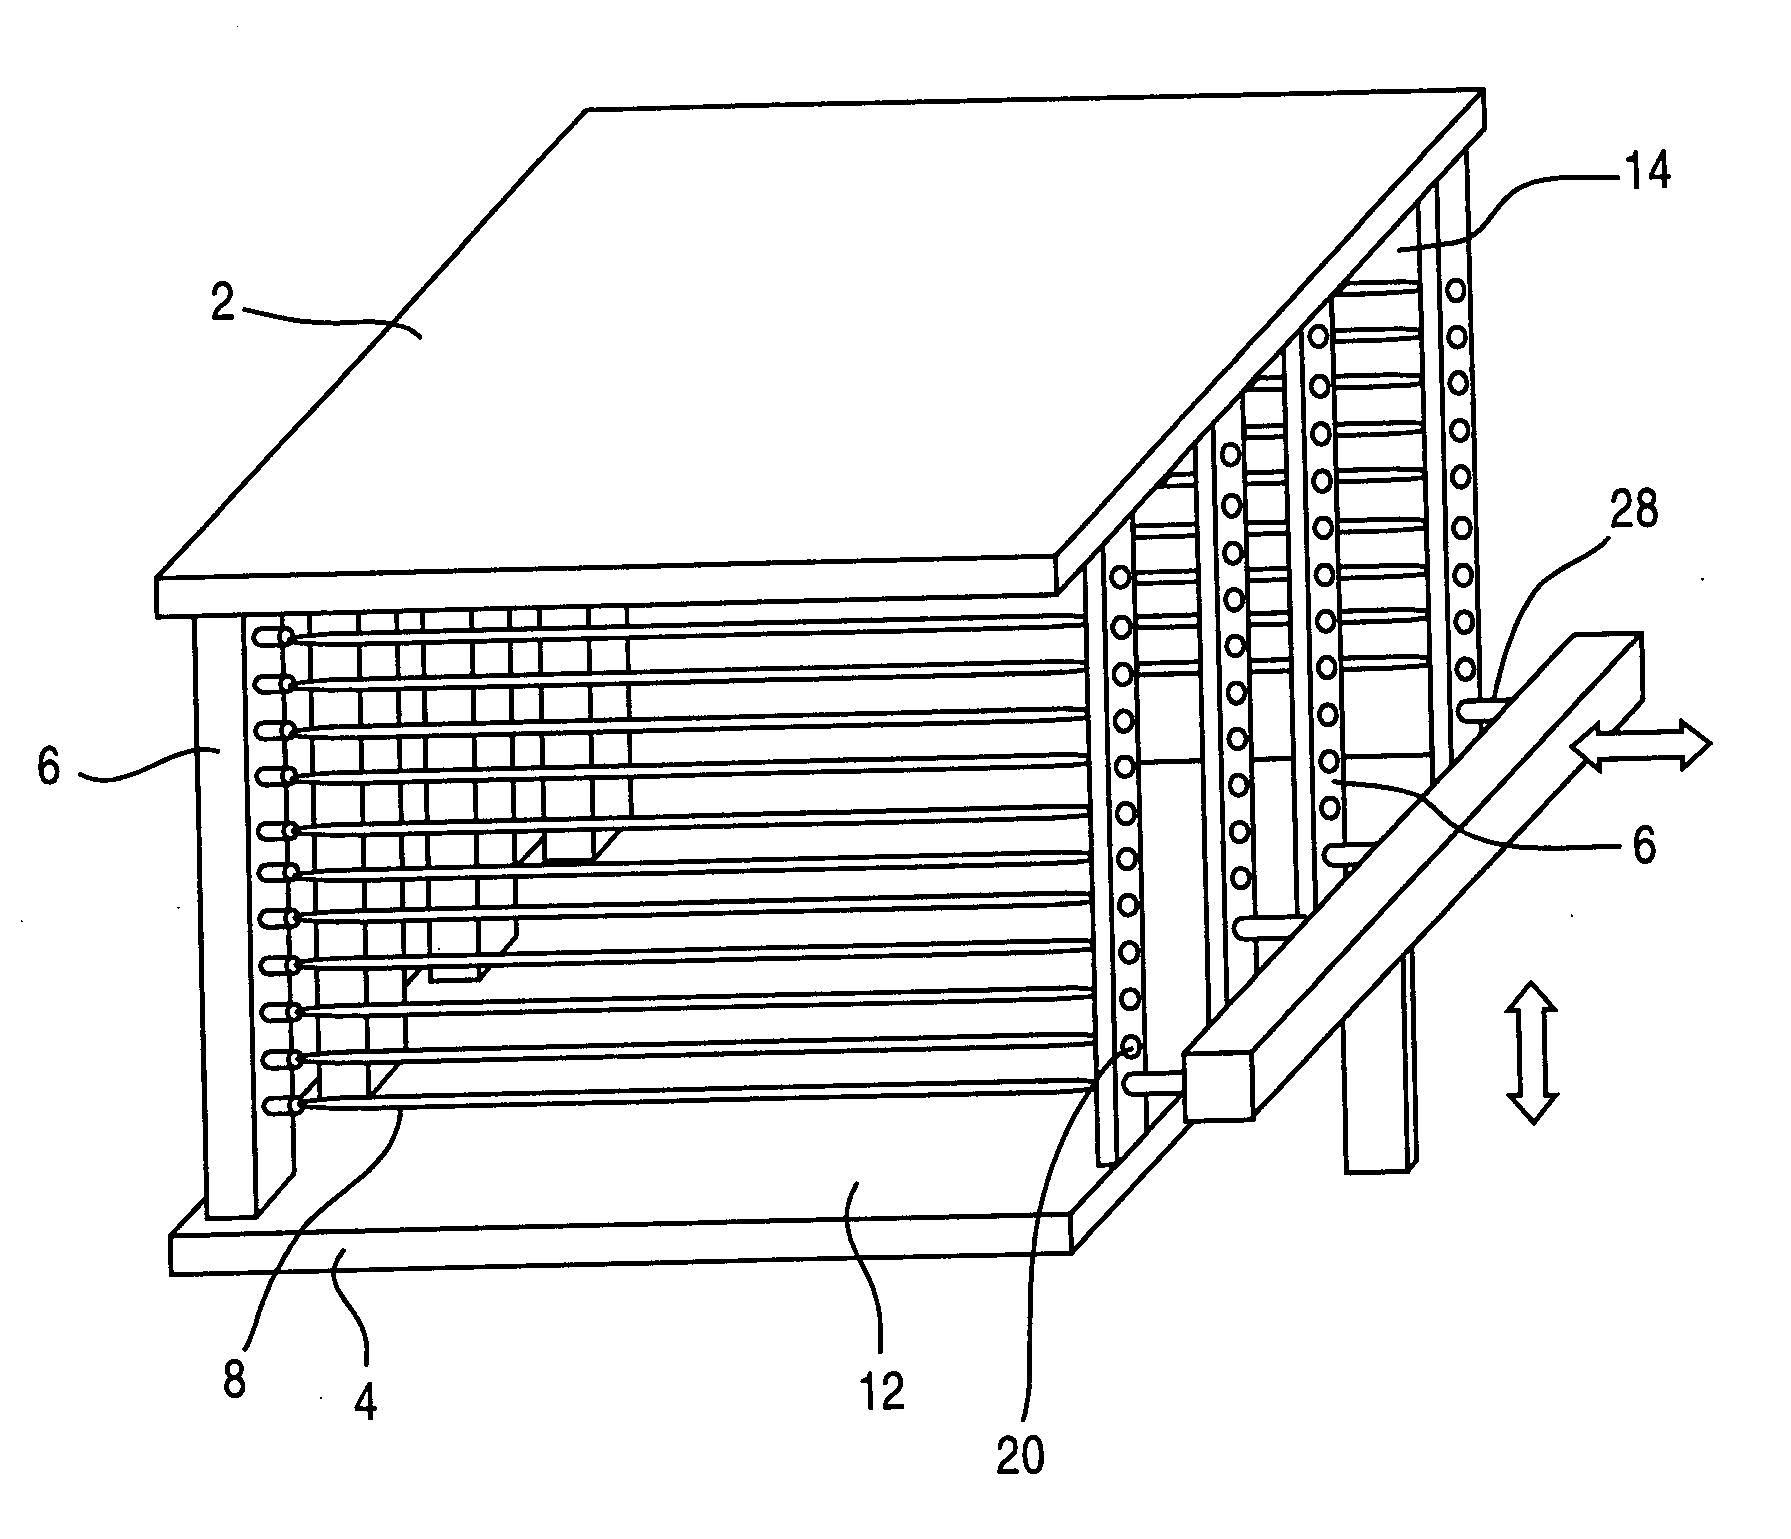 Substrate transportation device (wire)